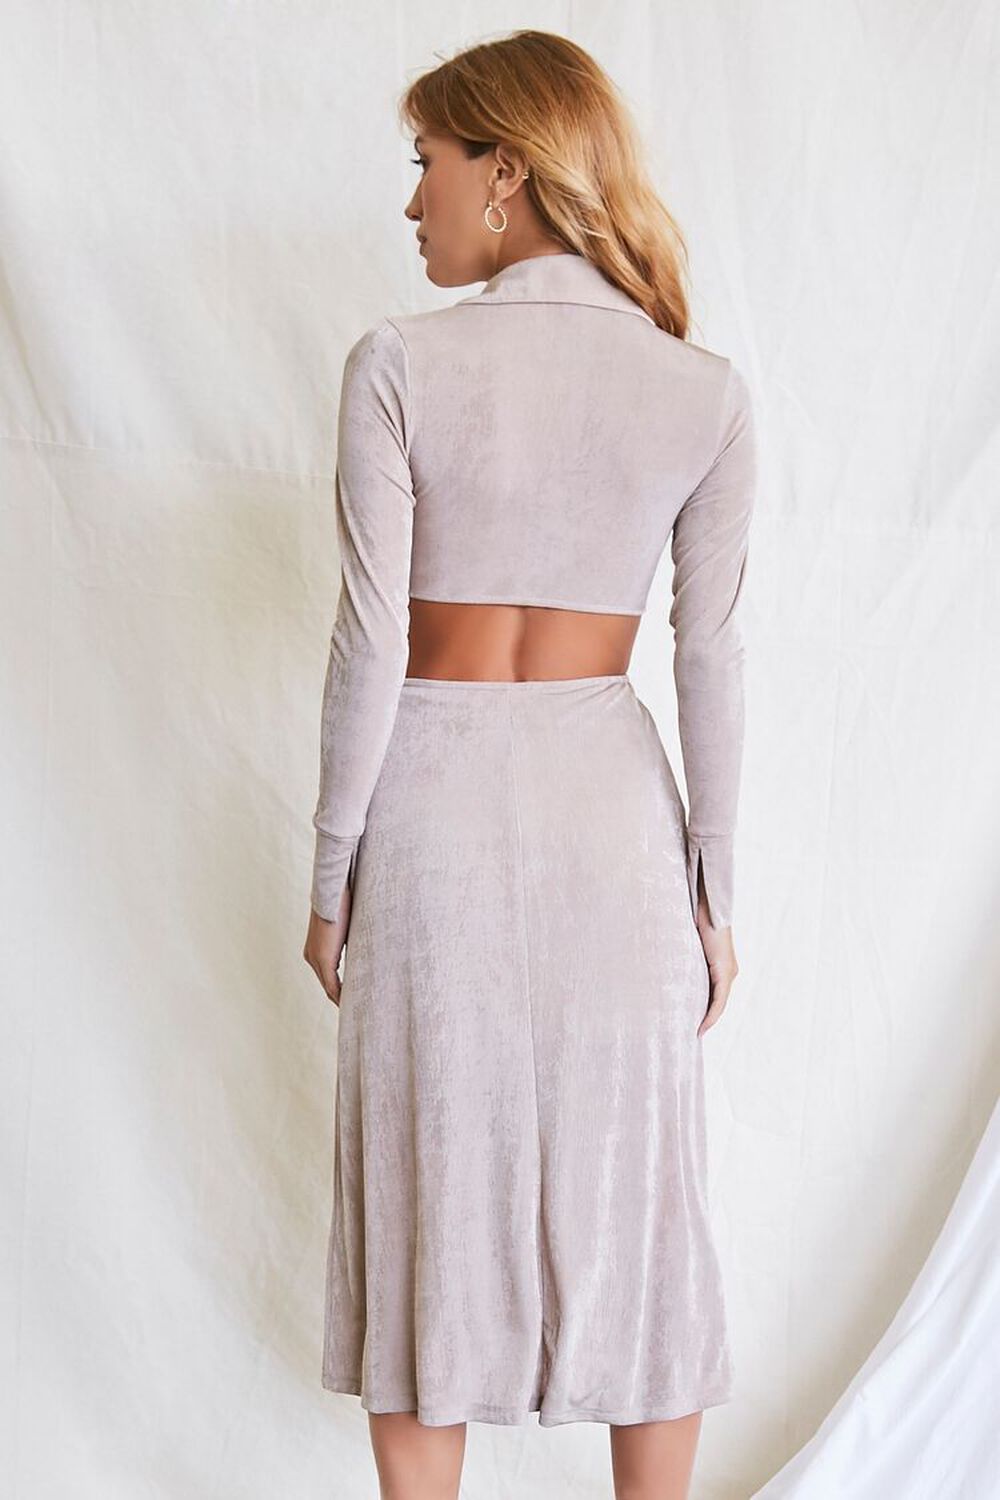 OYSTER GREY Button-Front Cutout Dress, image 3